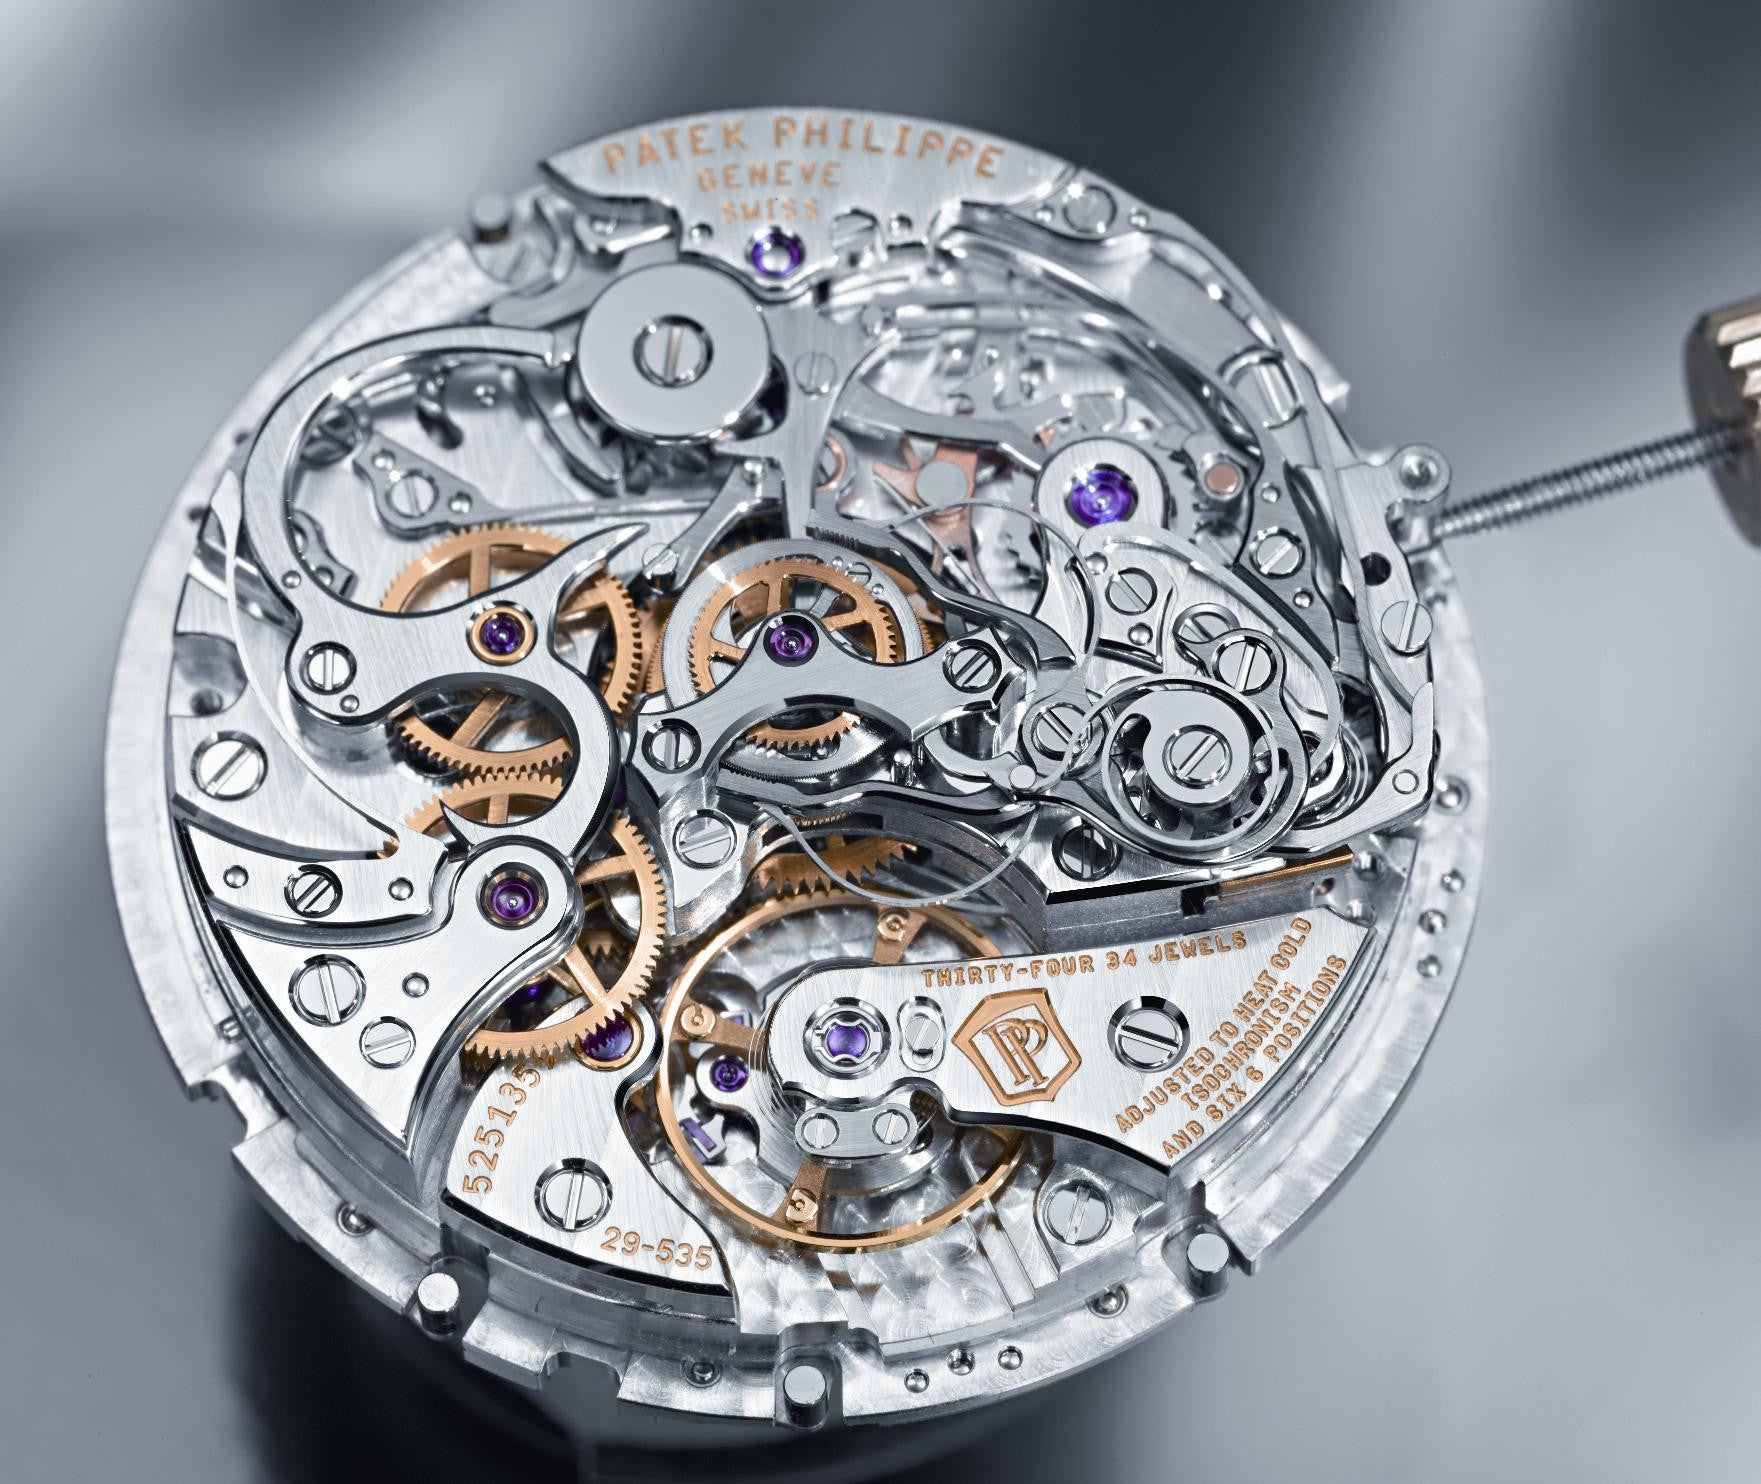 Quartz, Manual or Automatic? Choosing the Right Brega Watch Movement for You